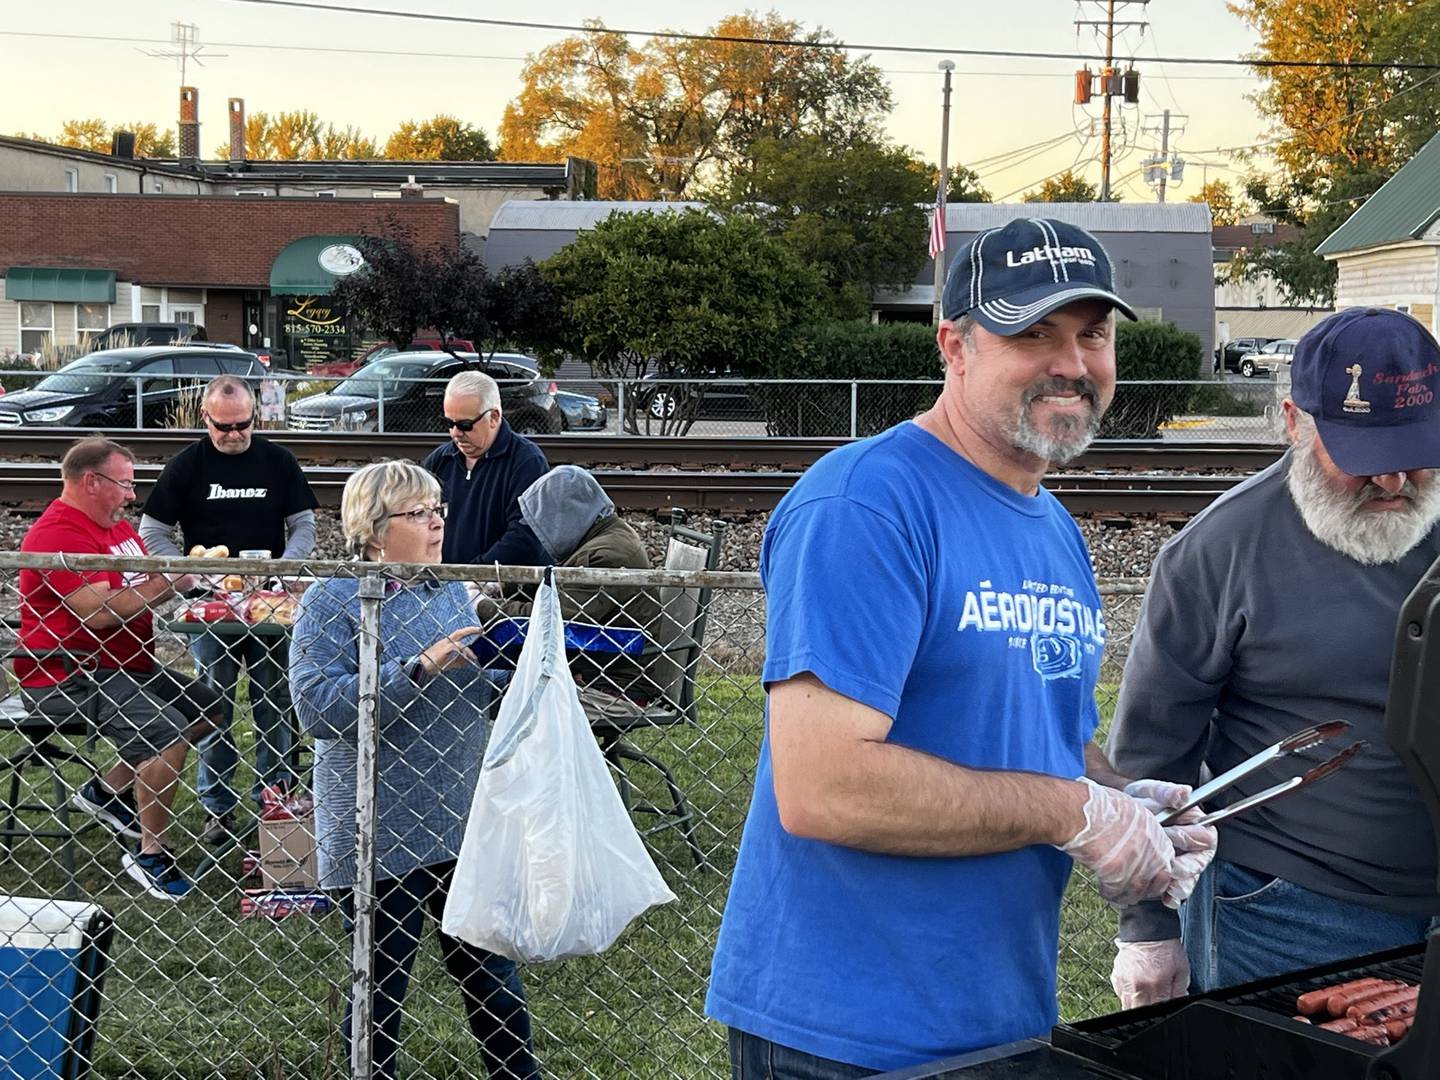 Sandwich City Council members volunteering at the Taste of Sandwich. (At the grill from left to right: Mayor Todd Latham and Alderman Bill Fritsch) (Beyond the fence from left to right: Alderpersons Rich Robinson, Bill Littlebrant, Cara Killey and Rick Whitecotton)